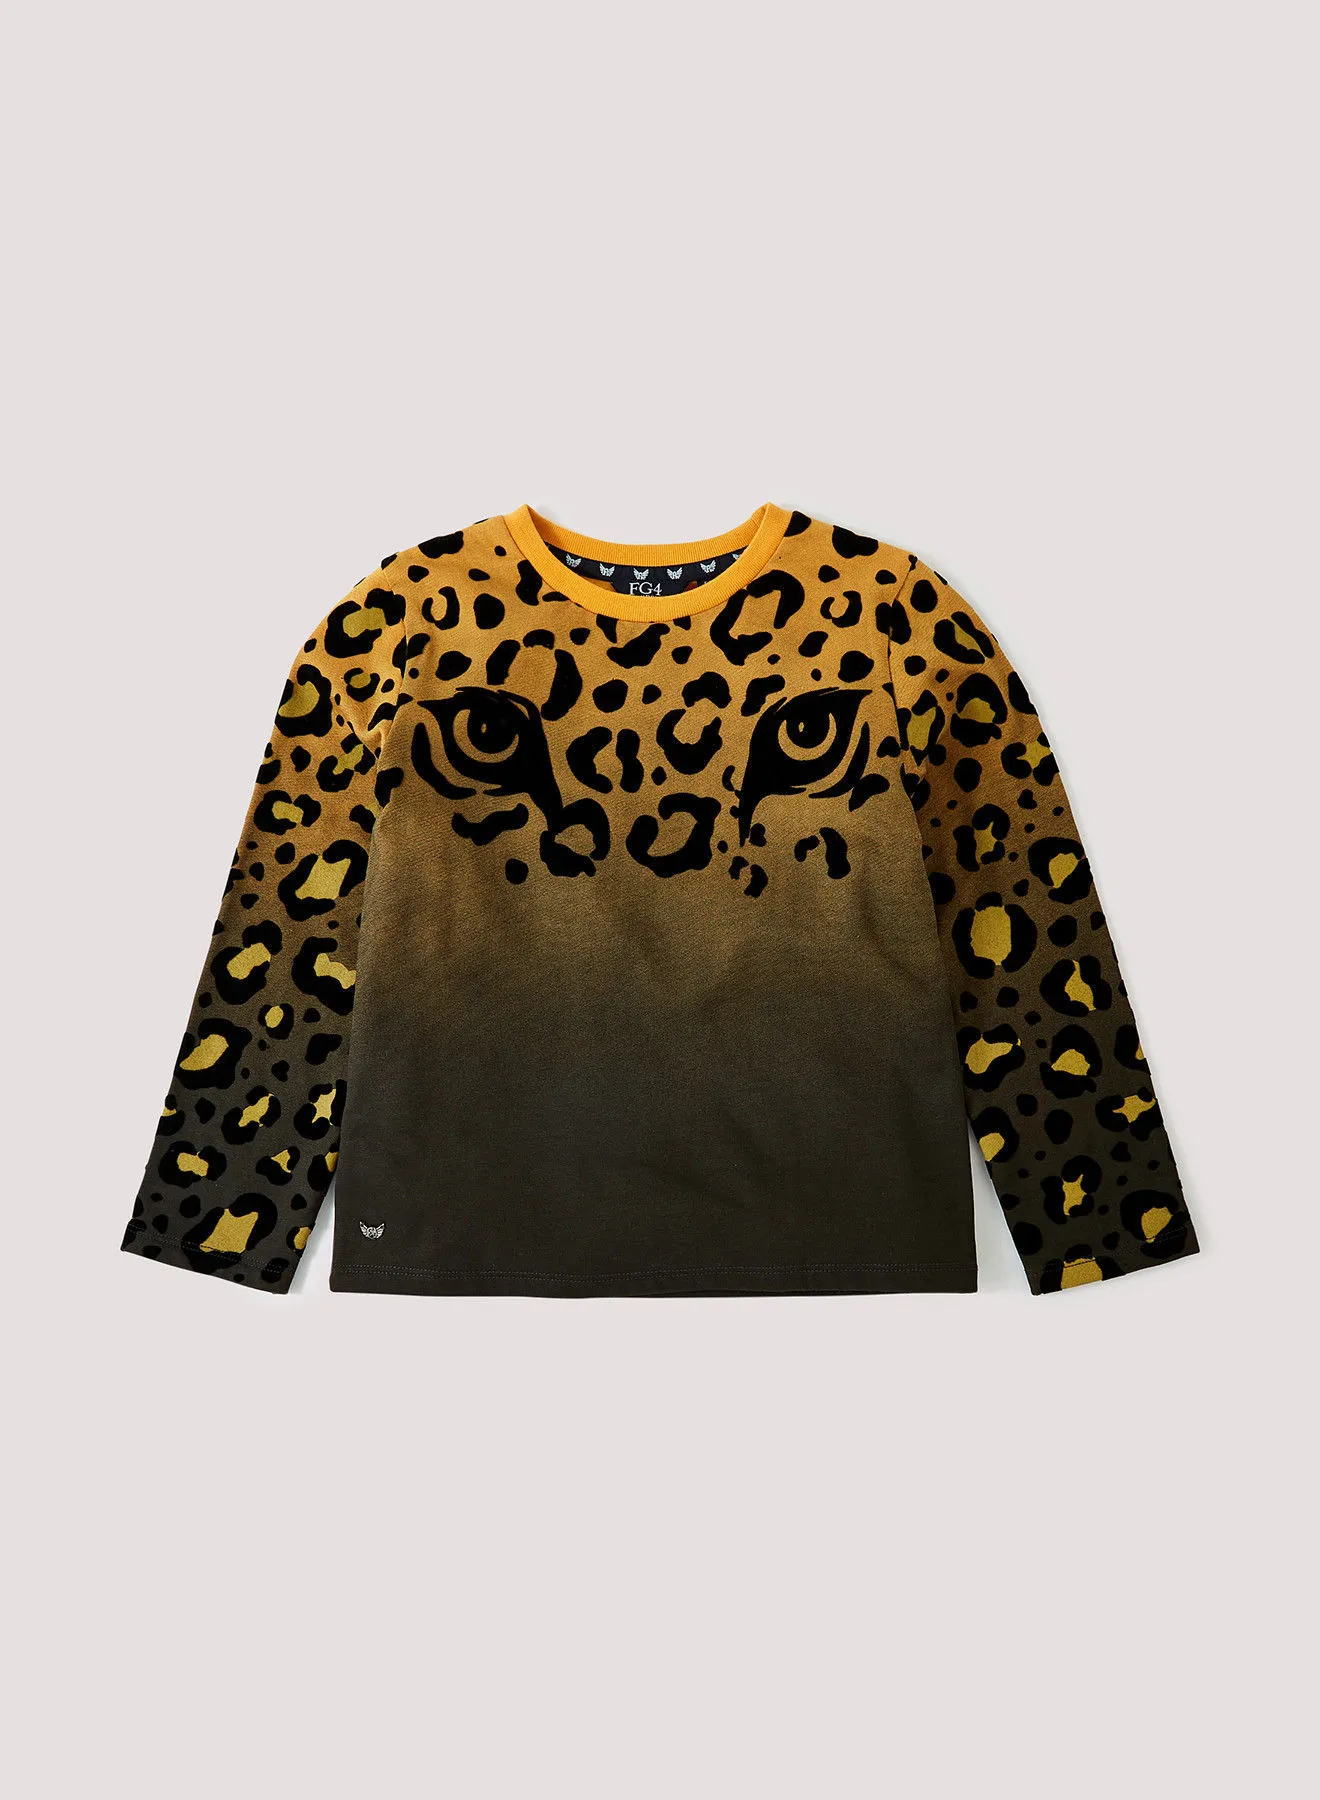 FG4 Kids FG4 Lynx LS Tee with flocking and digital ombre print